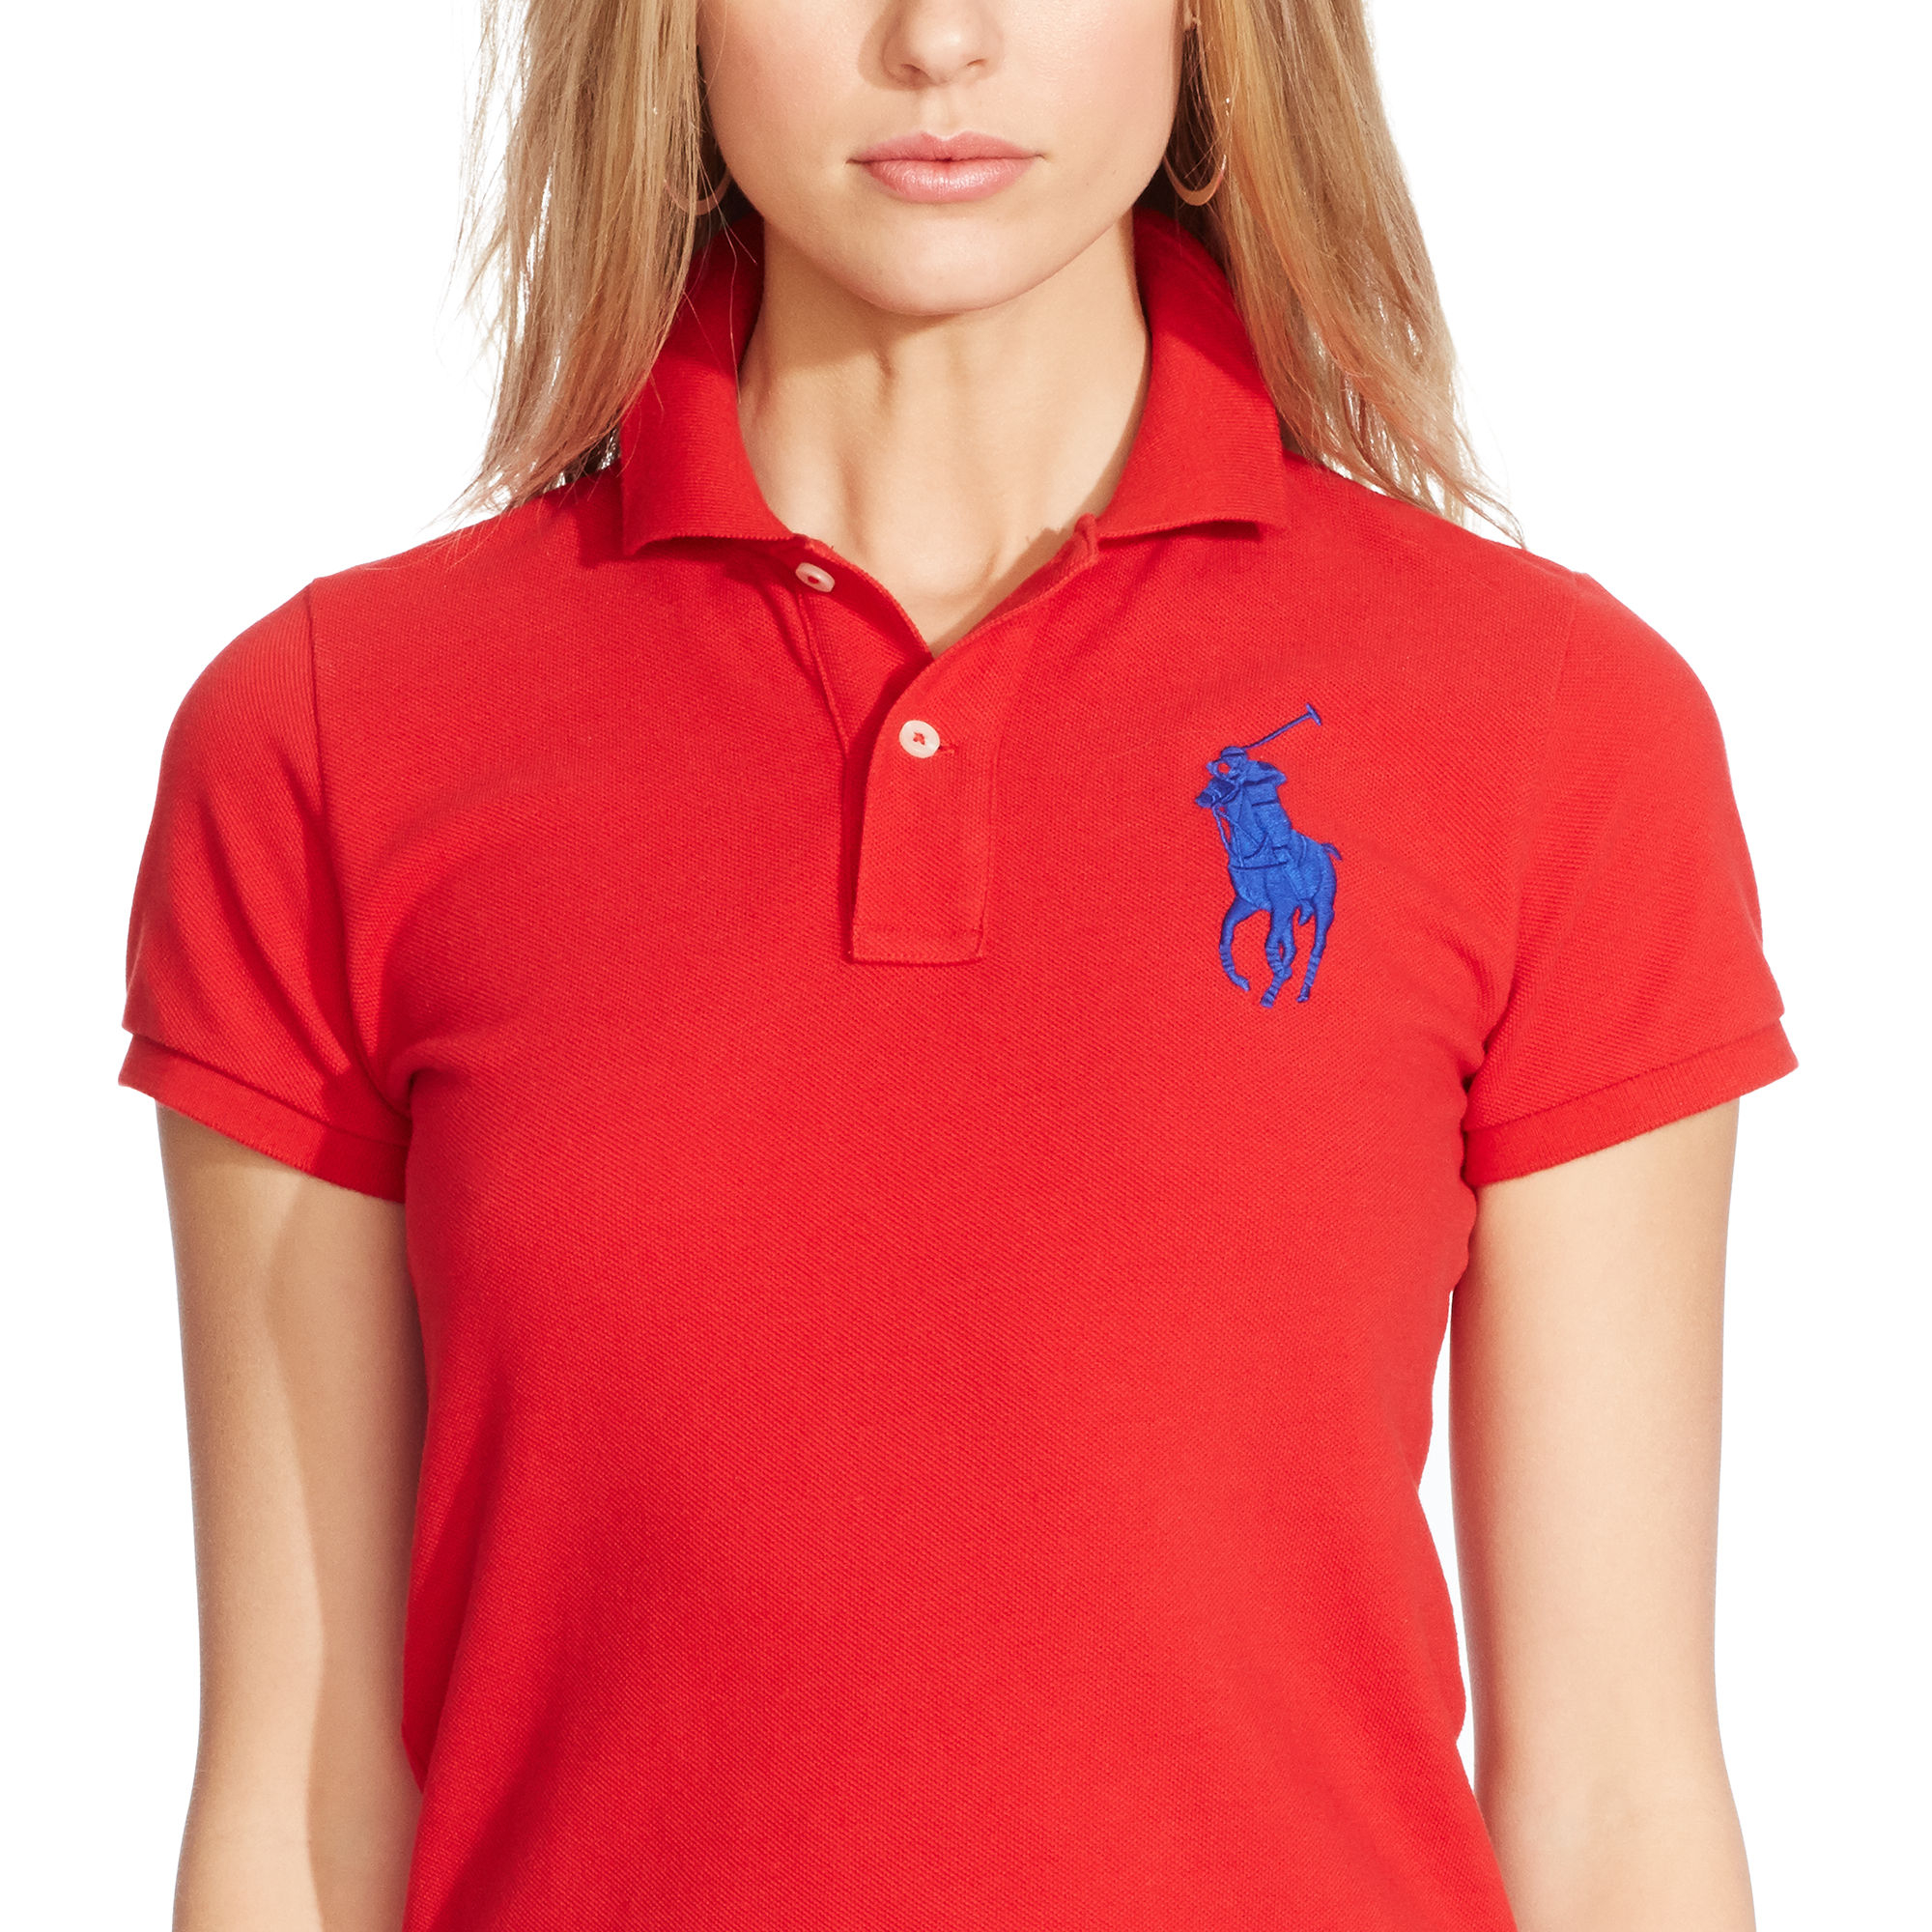 Polo Ralph Lauren Rl Red Skinny Fit Big Pony Polo Shirt Red Product 2 635685124 Normal 